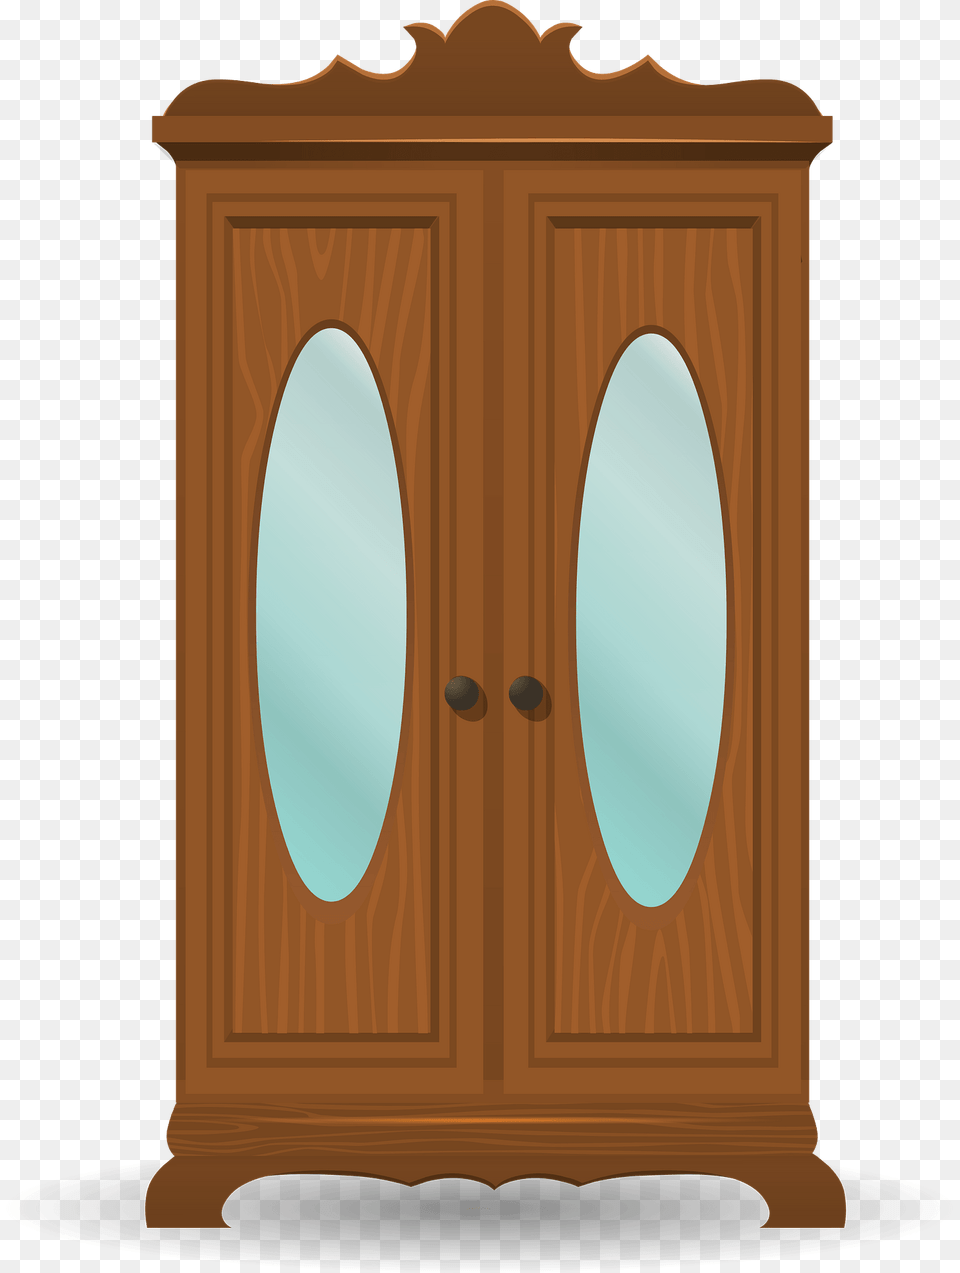 Glitch Simplified Tall Cabinet With Shiny Oval Mirrors Clipart, Closet, Cupboard, Furniture, Wardrobe Free Transparent Png